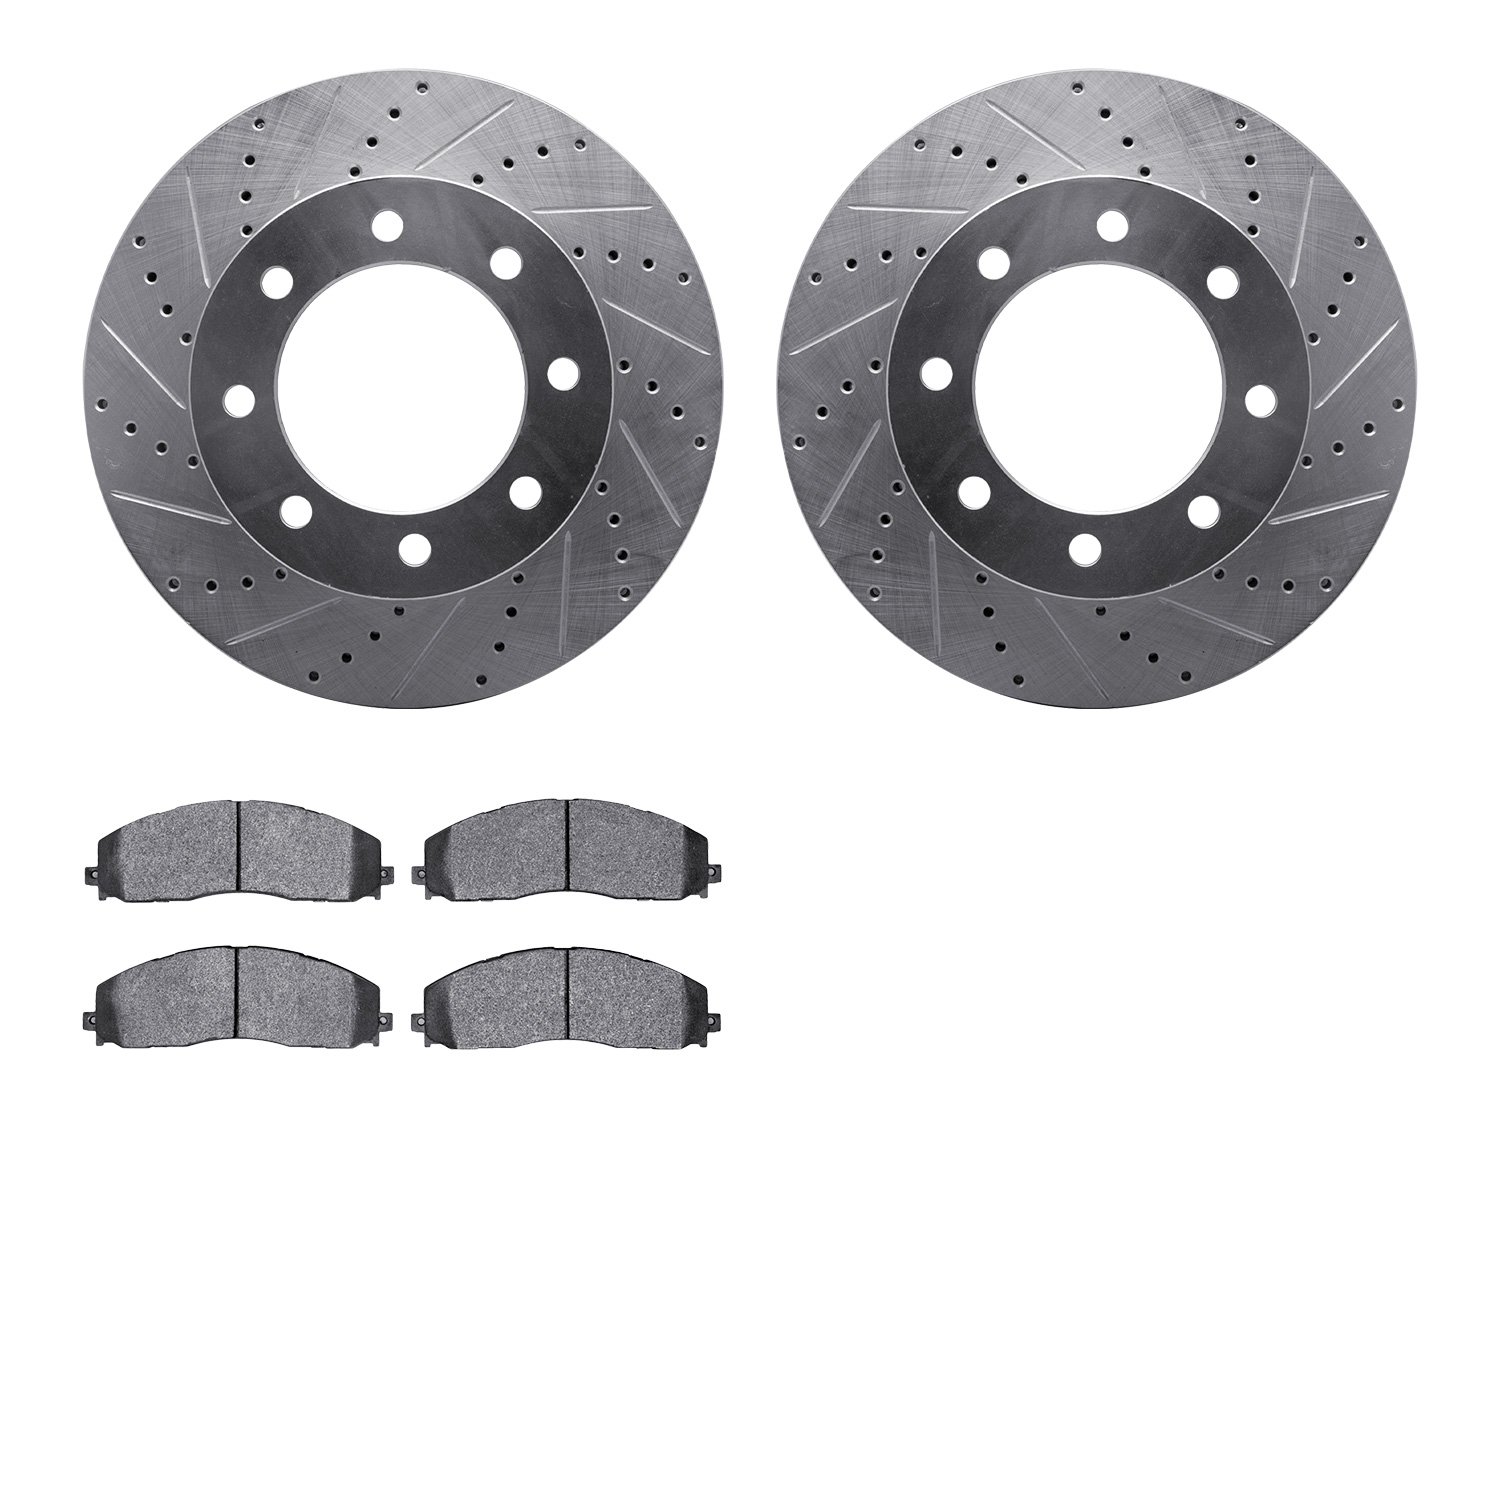 7502-99675 Drilled/Slotted Brake Rotors w/5000 Advanced Brake Pads Kit [Silver], Fits Select Ford/Lincoln/Mercury/Mazda, Positio